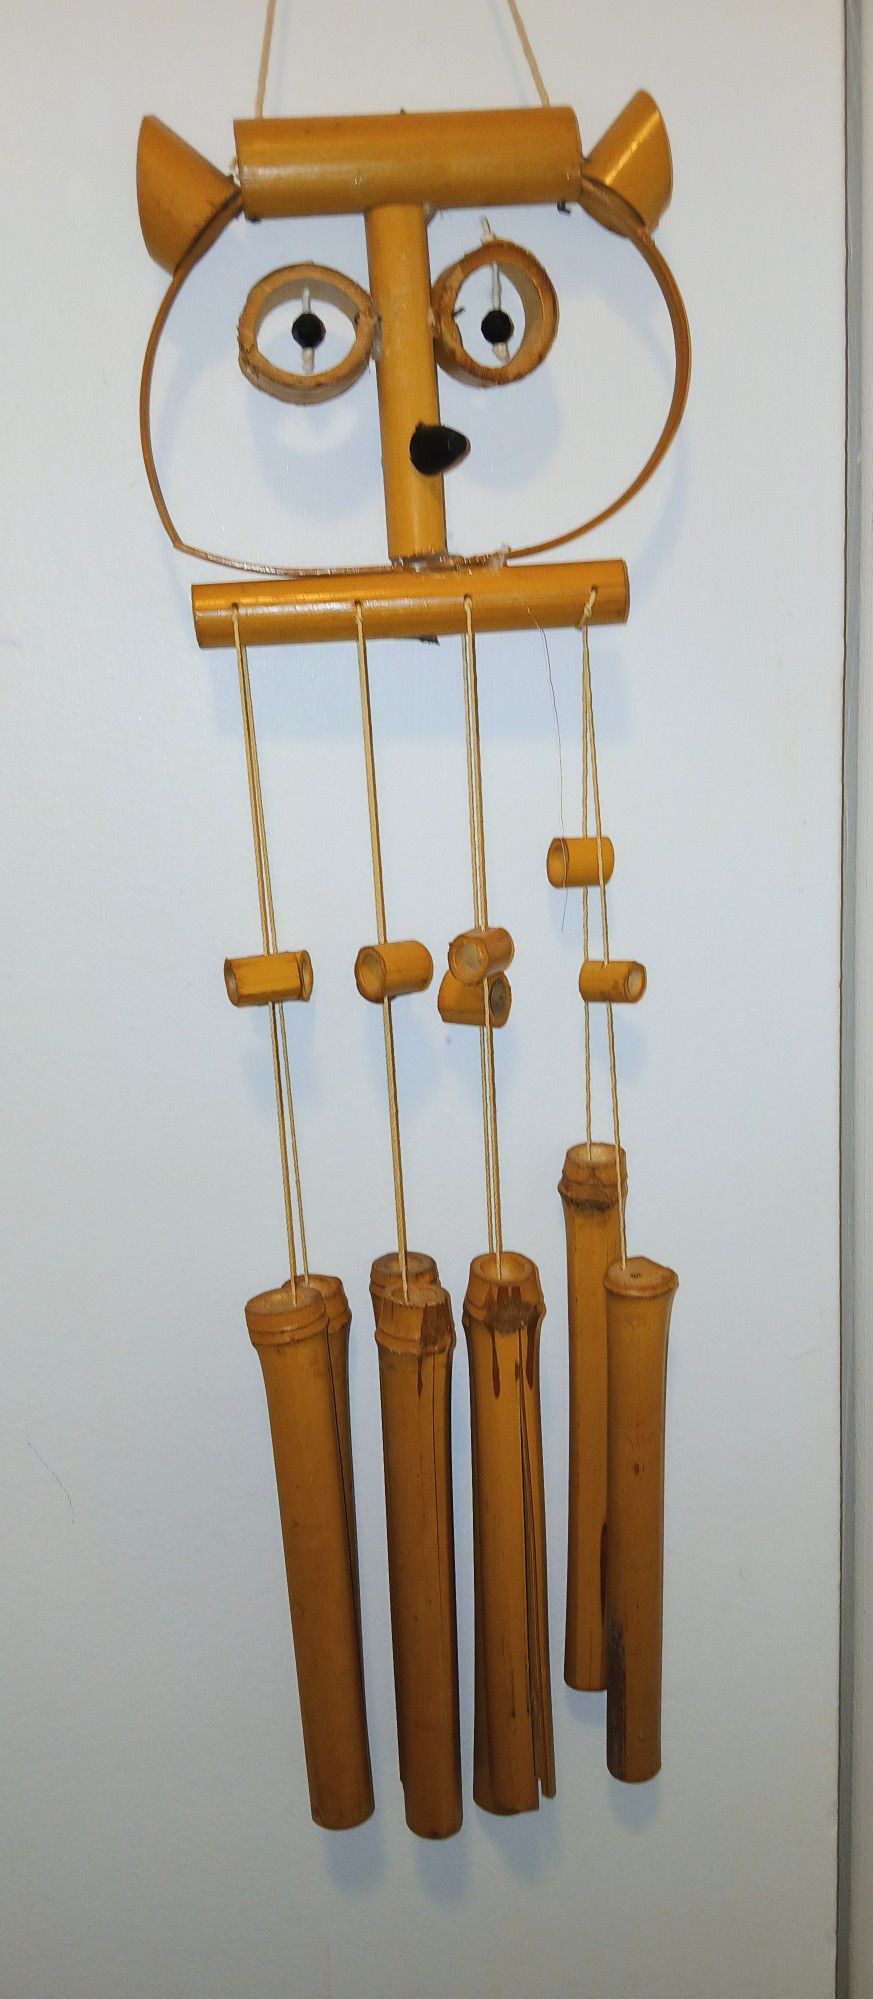 Wooden Wind Chime